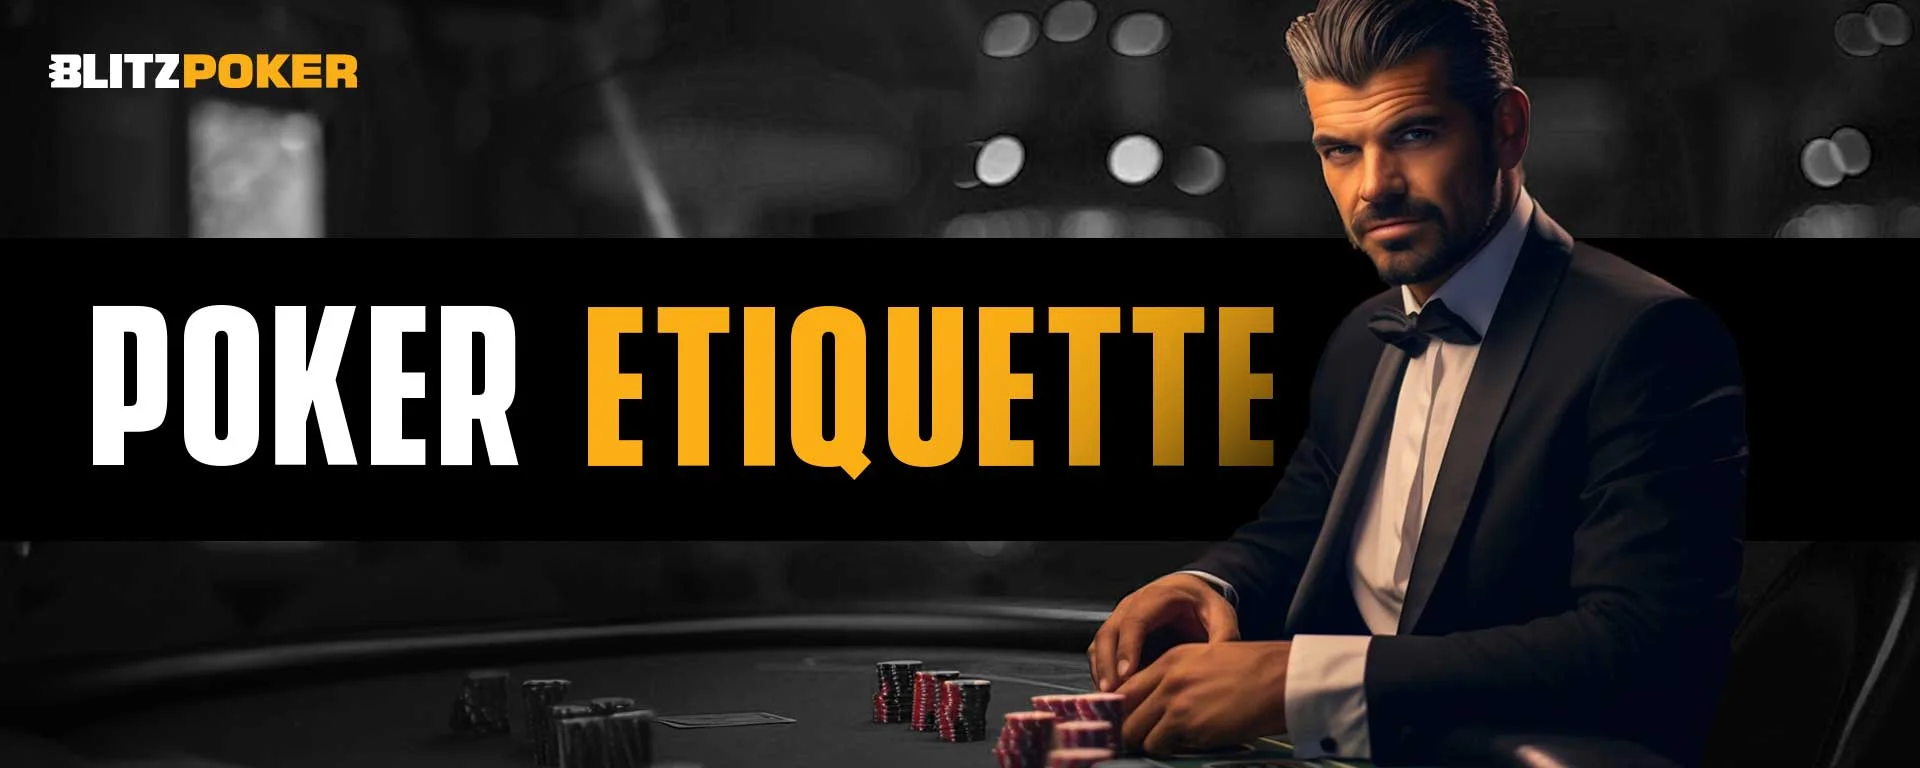 Poker Etiquette Essentials: How to Conduct Yourself at the Poker Table